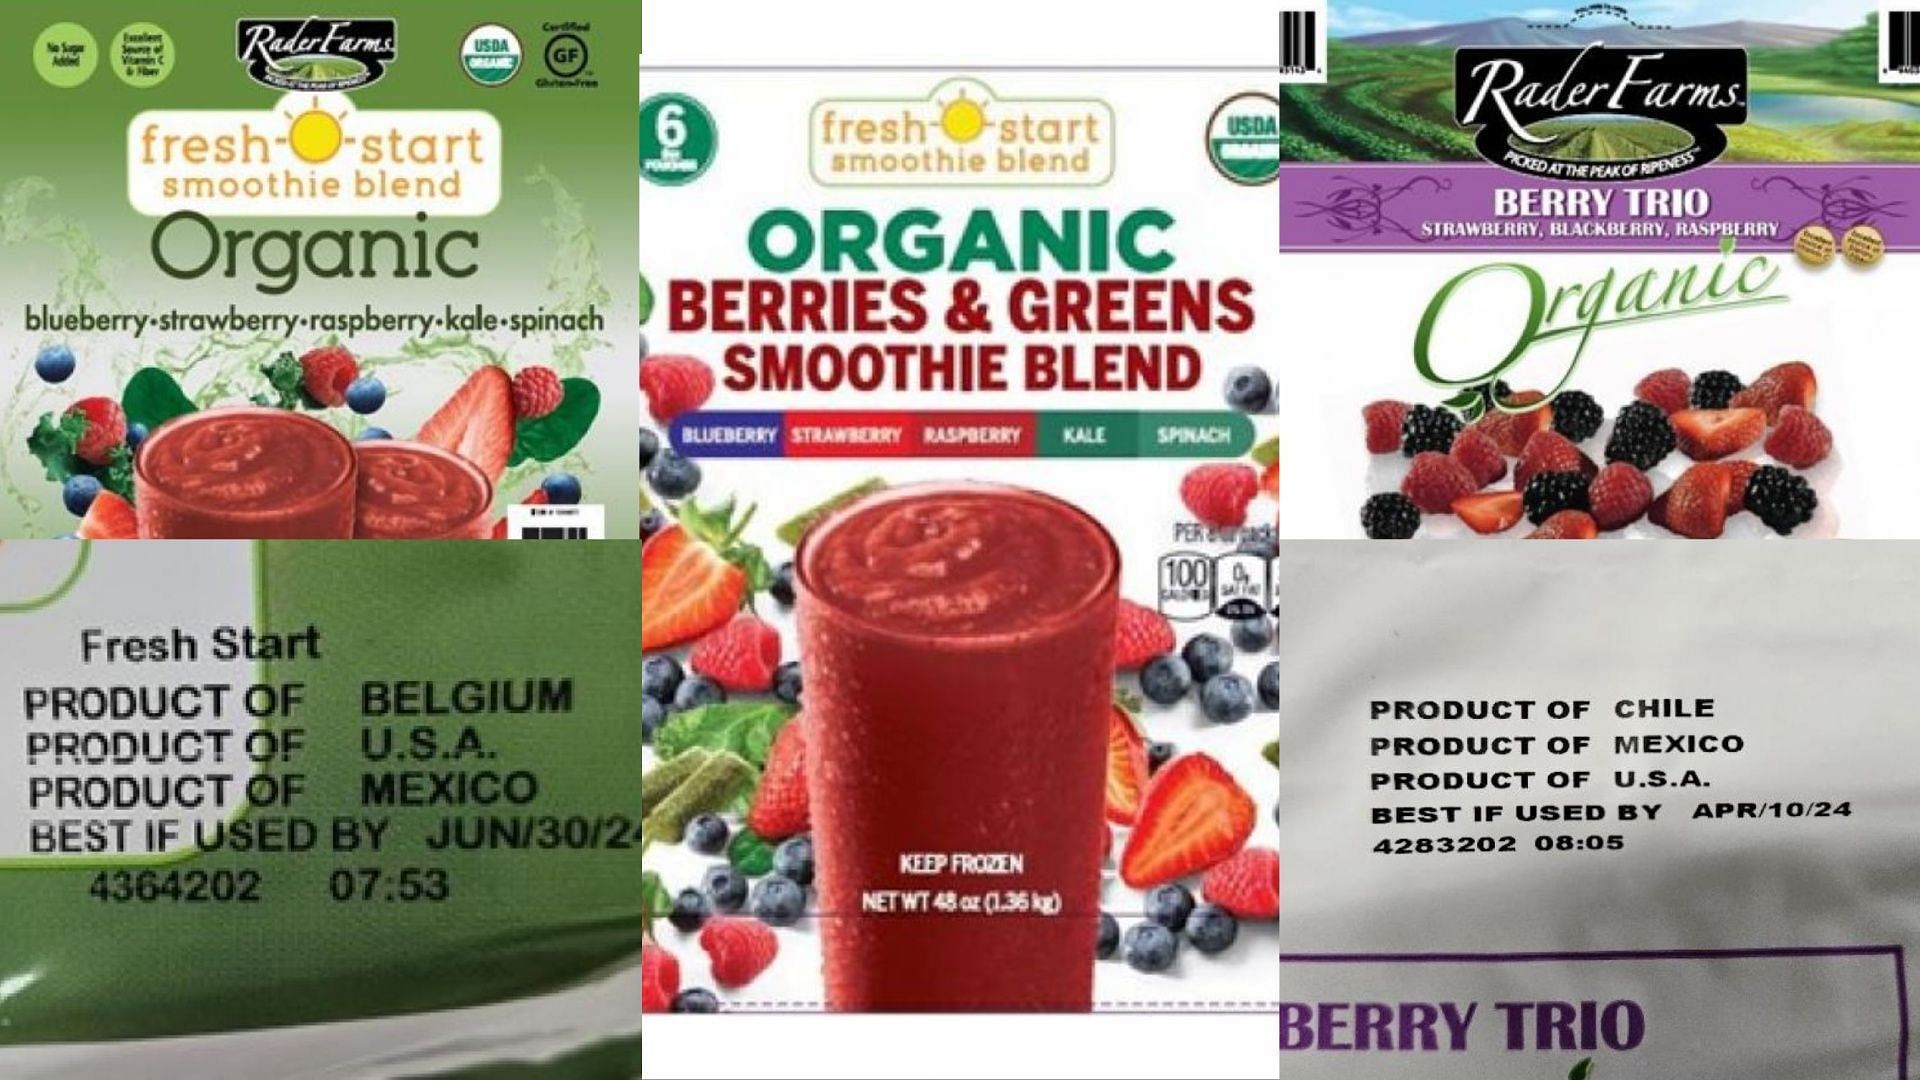 Some of the recalled Rader Farms frozen fruit products which are affected by the recall (Image via FDA)